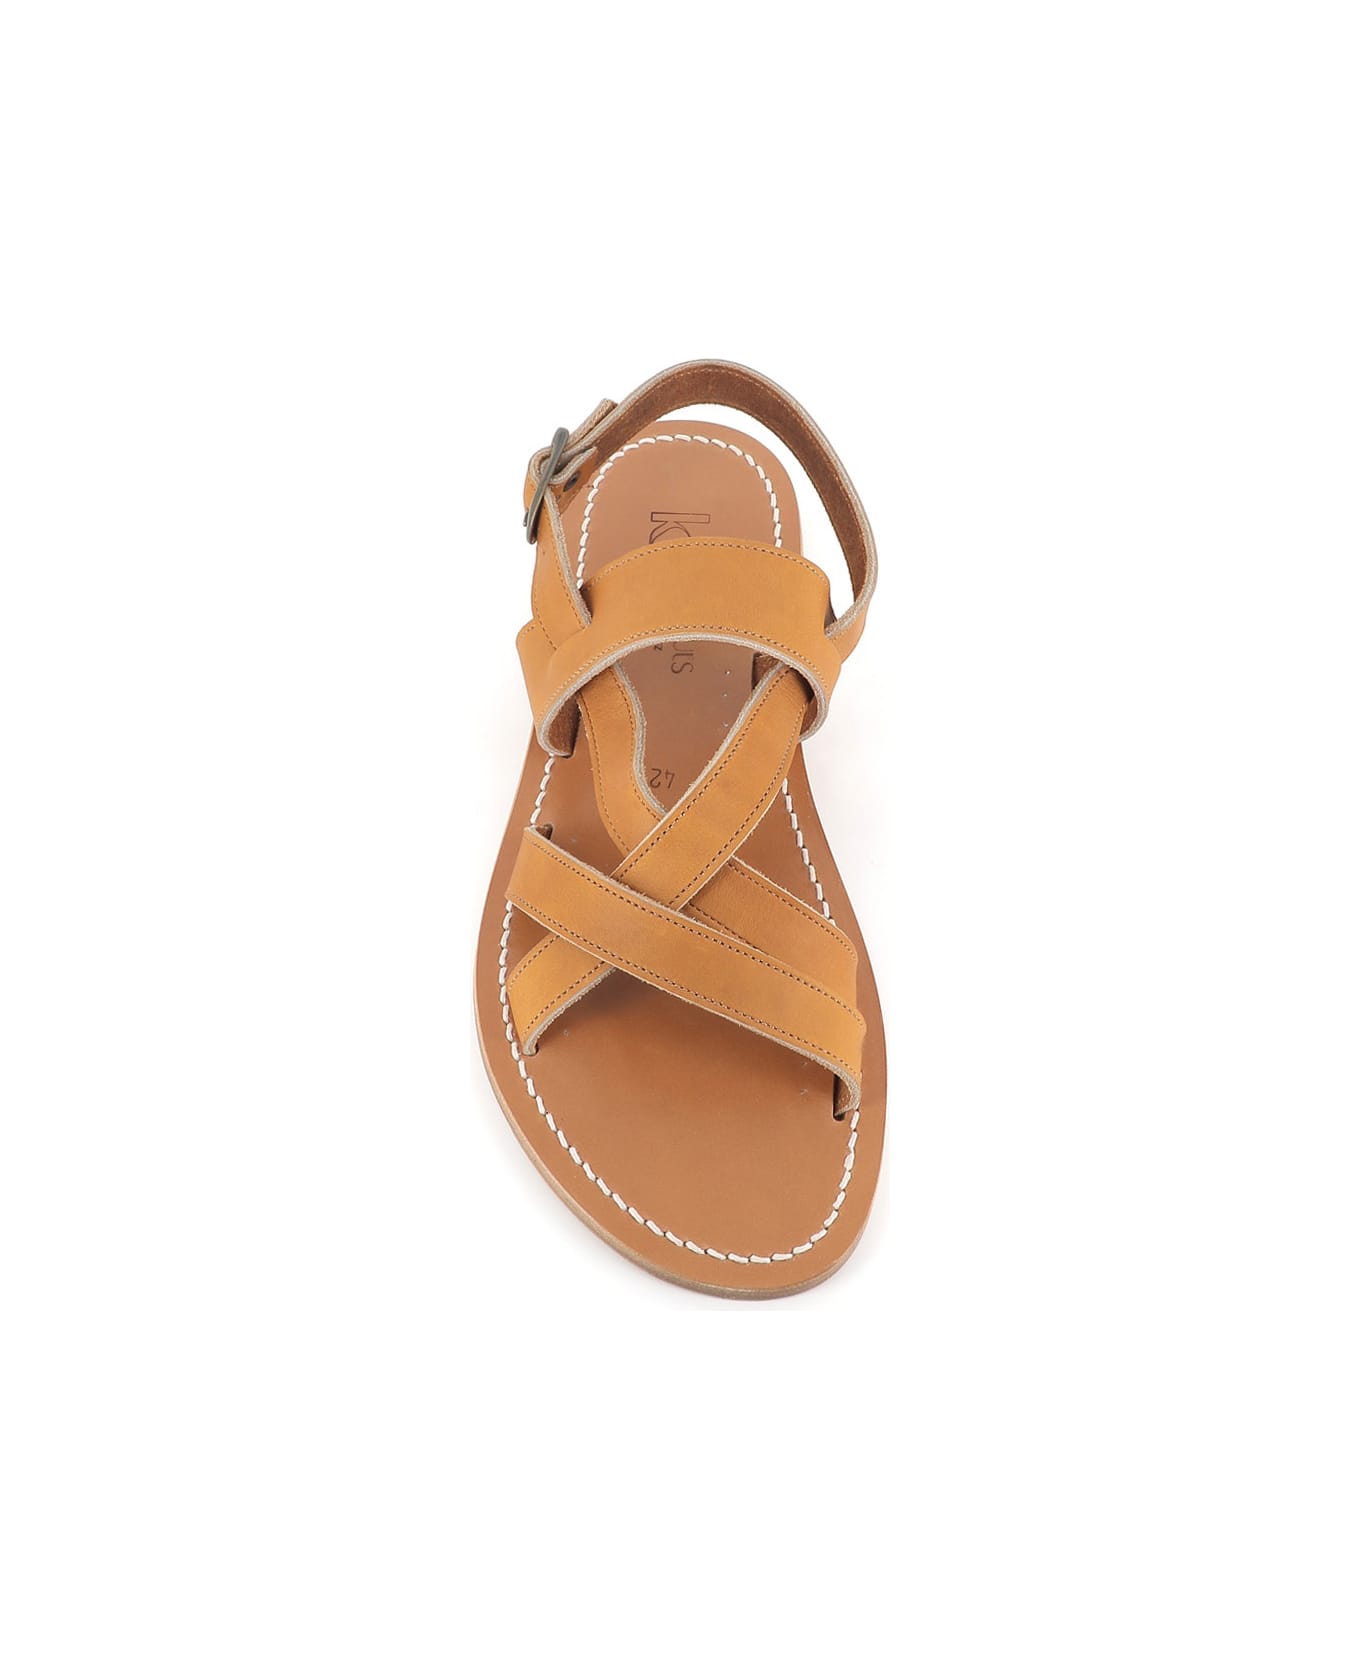 K.Jacques Sandal Jonas - Leather その他各種シューズ